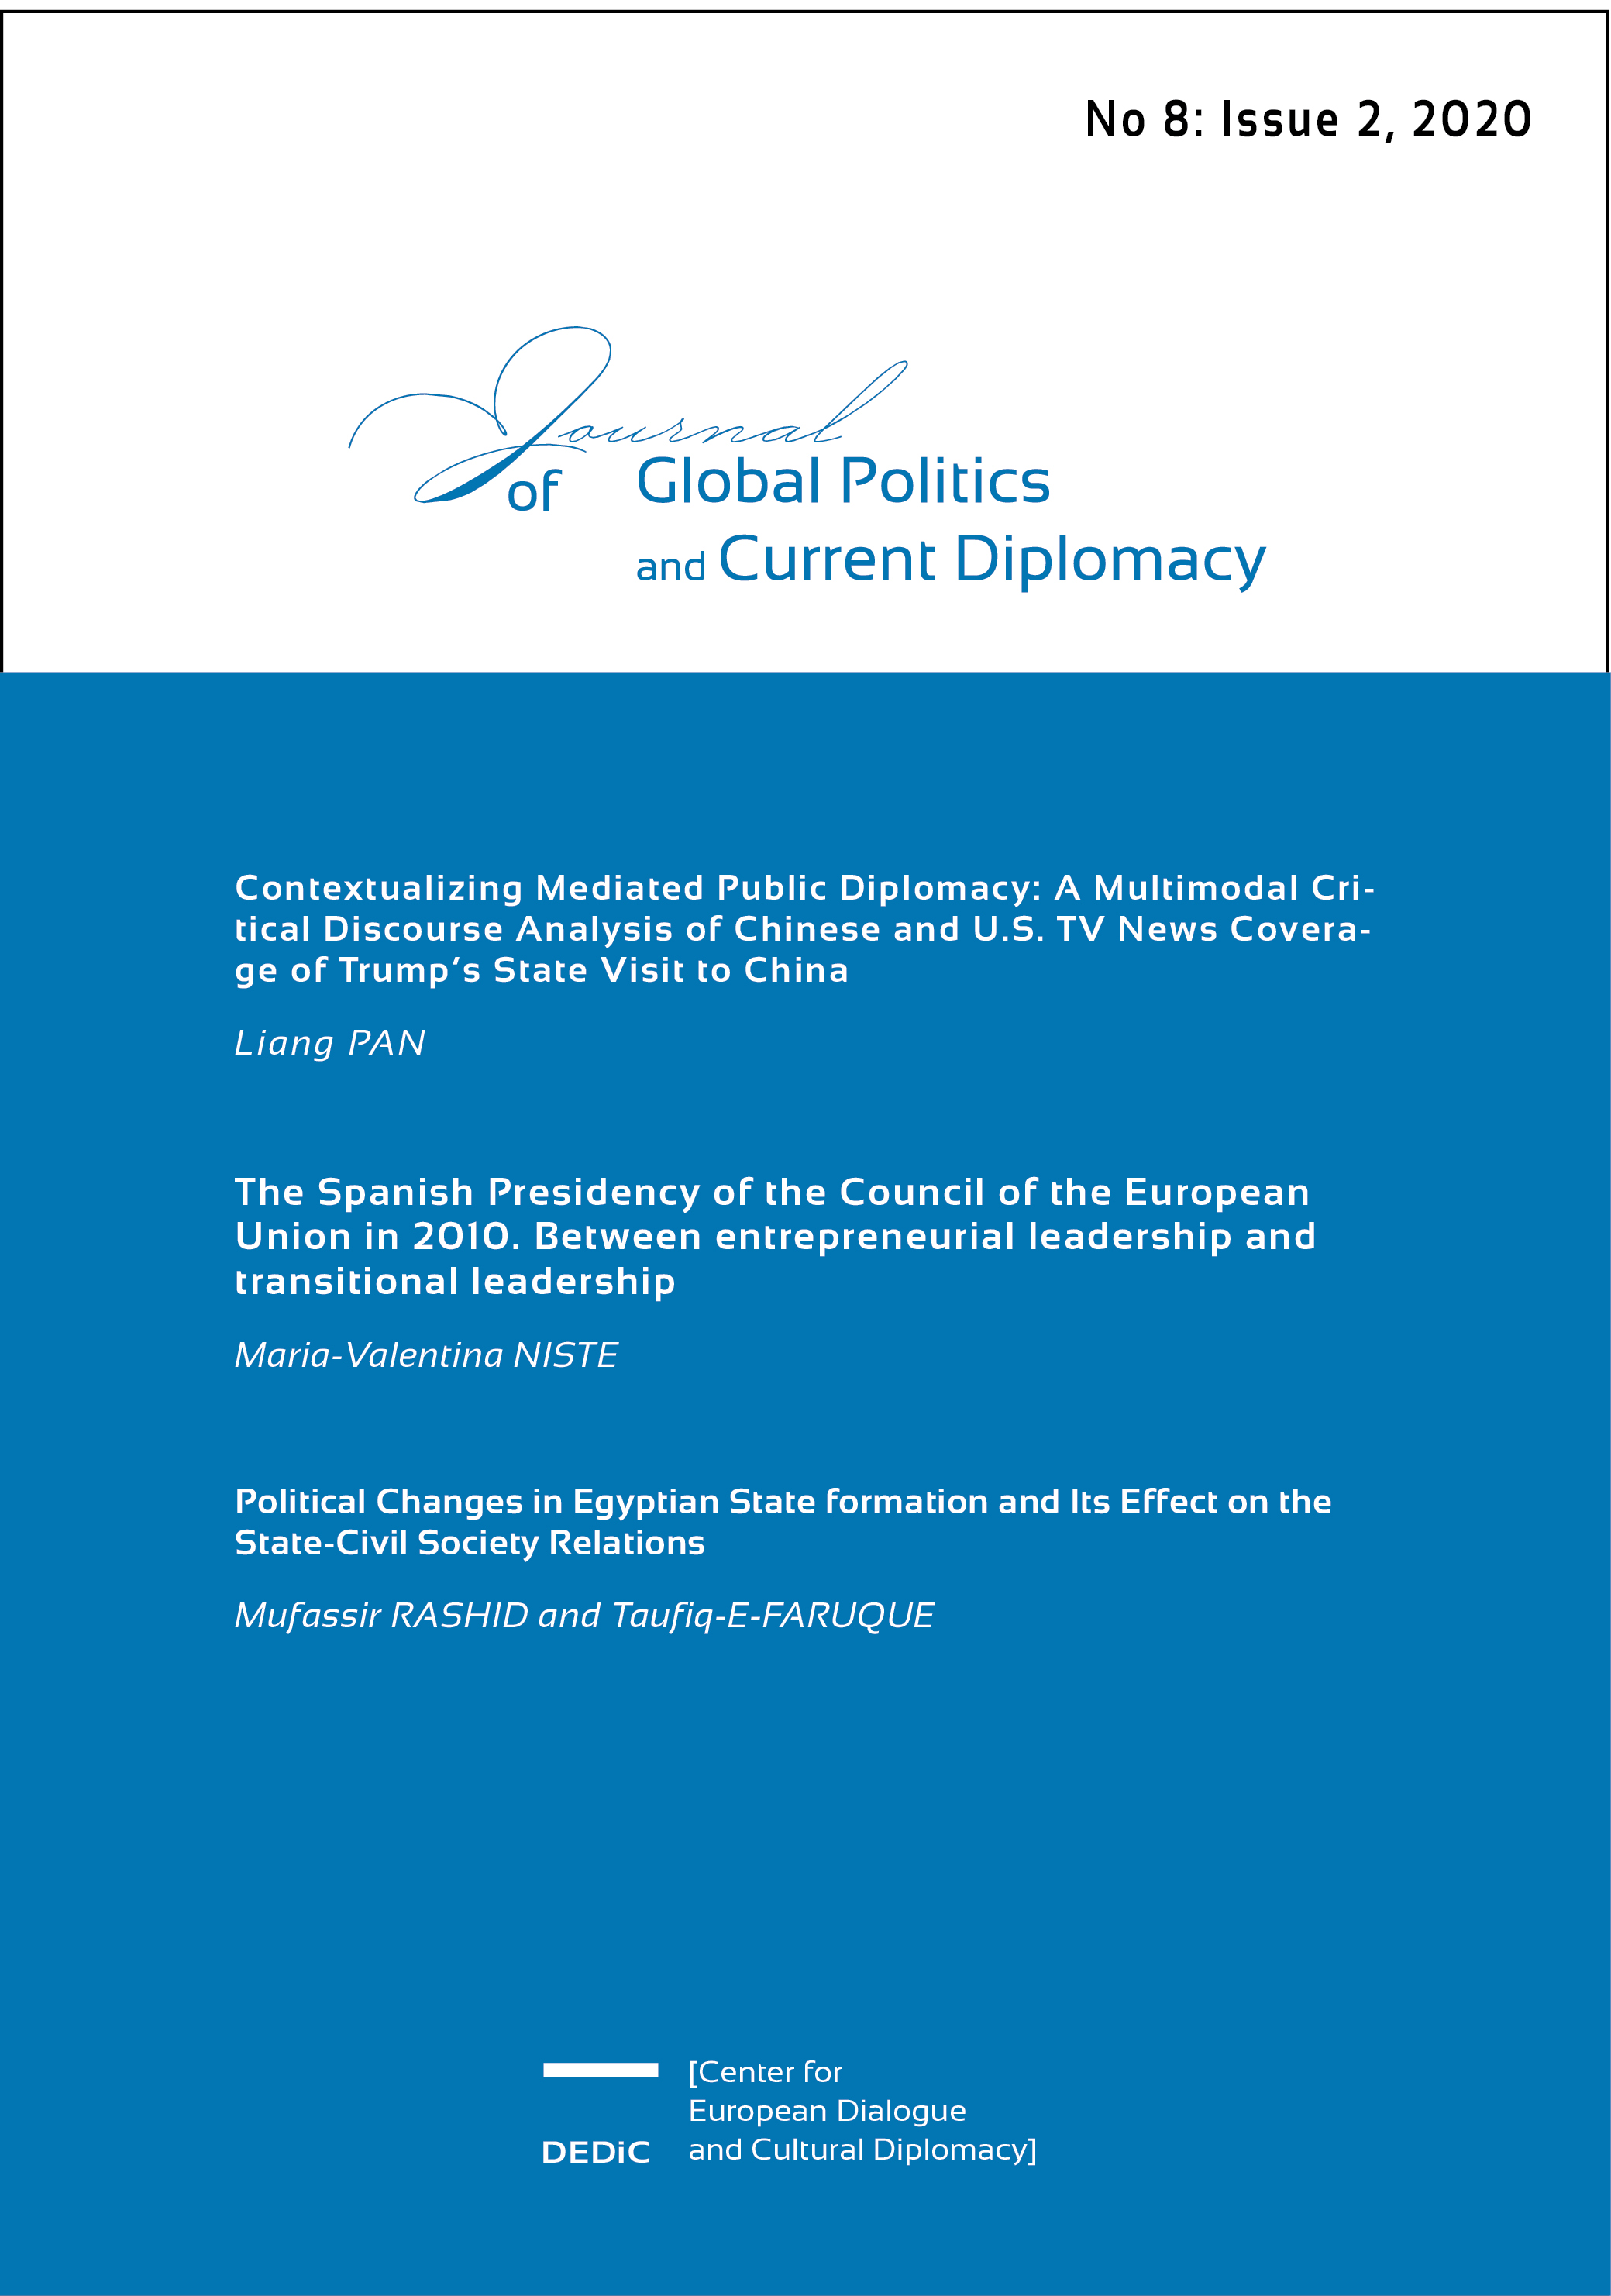 Political Changes in Egyptian State Formation and Its Effect on the State-Civil Society Relations Cover Image